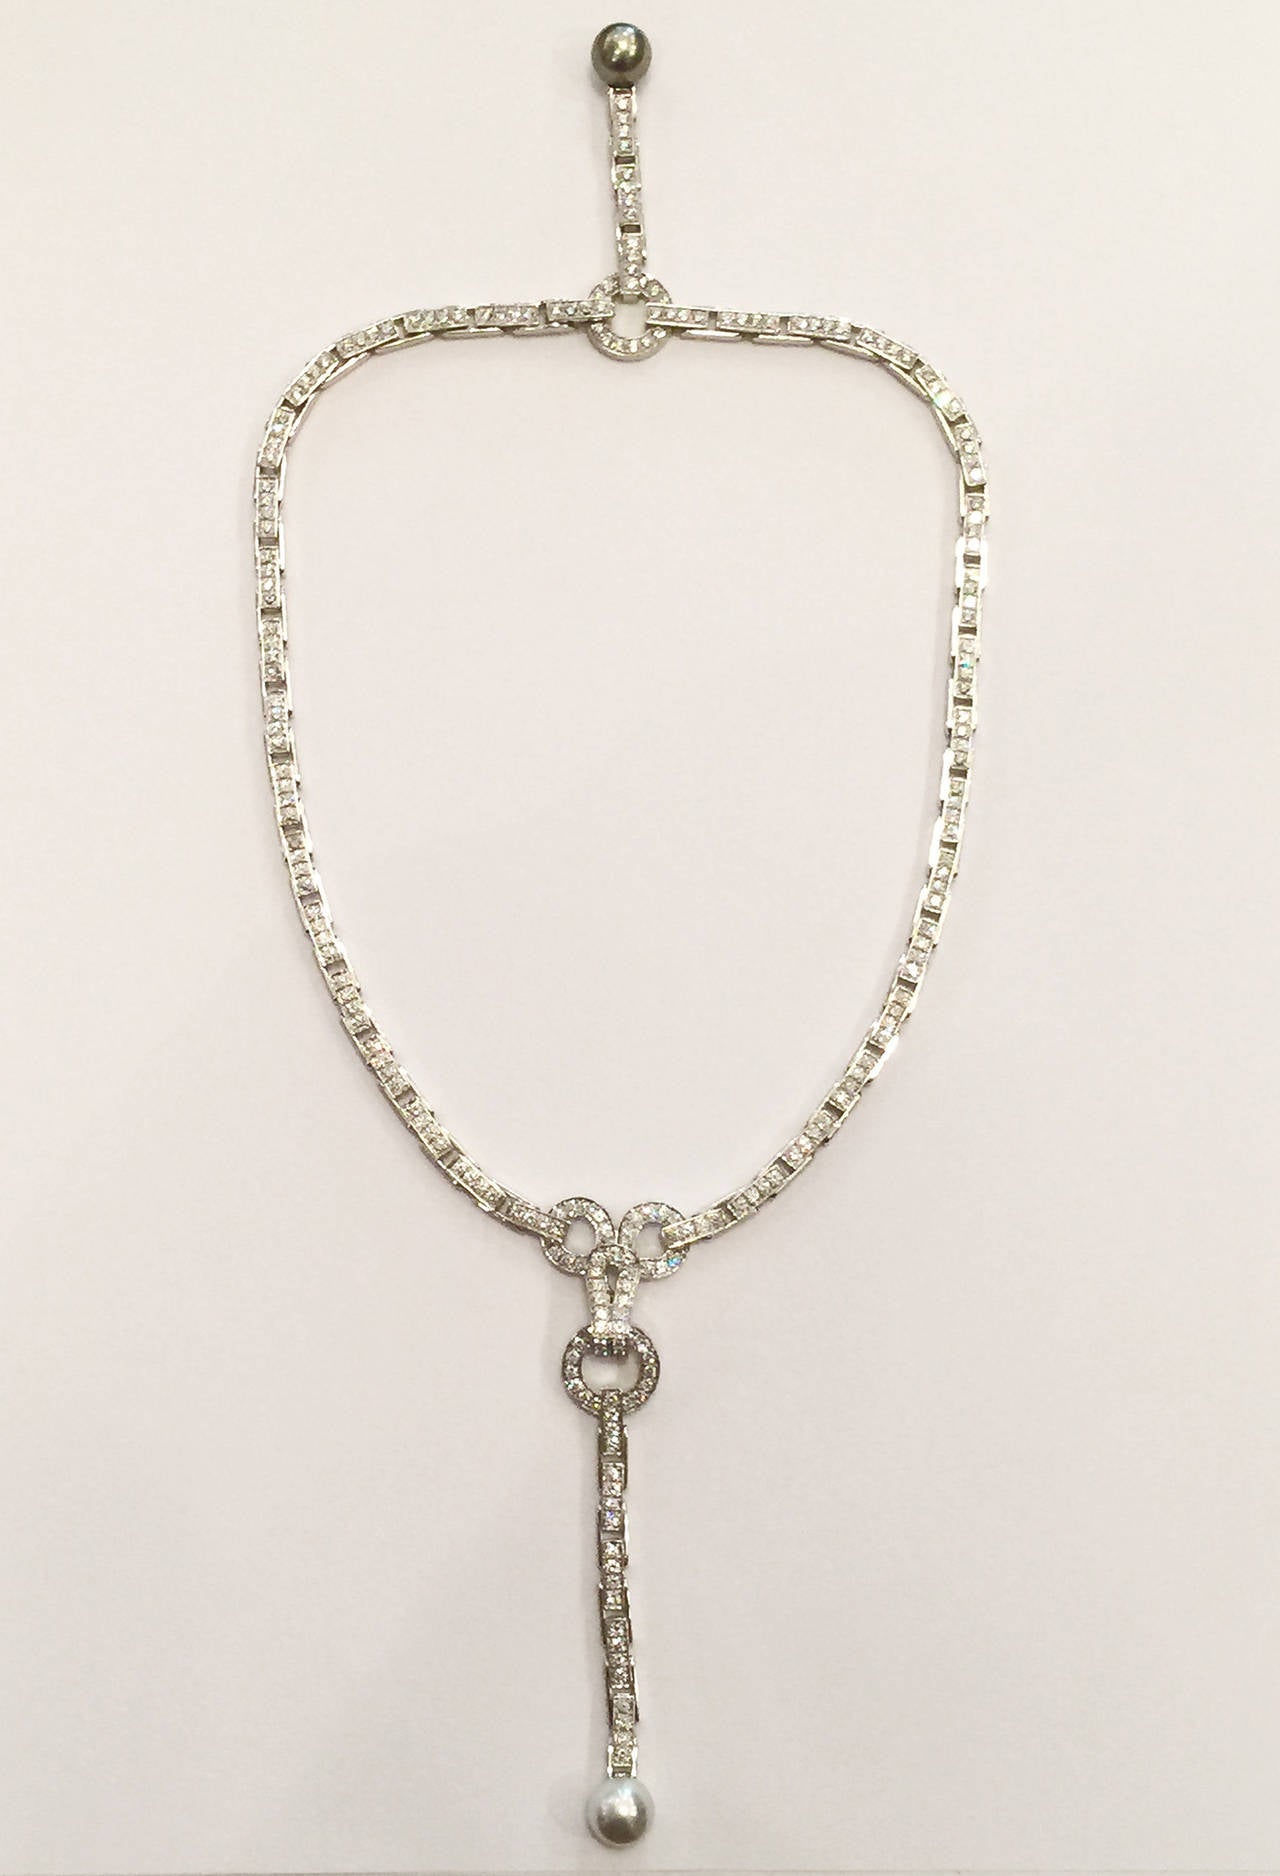 White gold Cartier necklace, Agrafe collection entirely set with brilliants.
The movable face pendant is decorated with a white pearl, the back one with a grey tahitian pearl.
Diamond weight : 18,80 carats
Length of necklace : 40 cm
Retail price